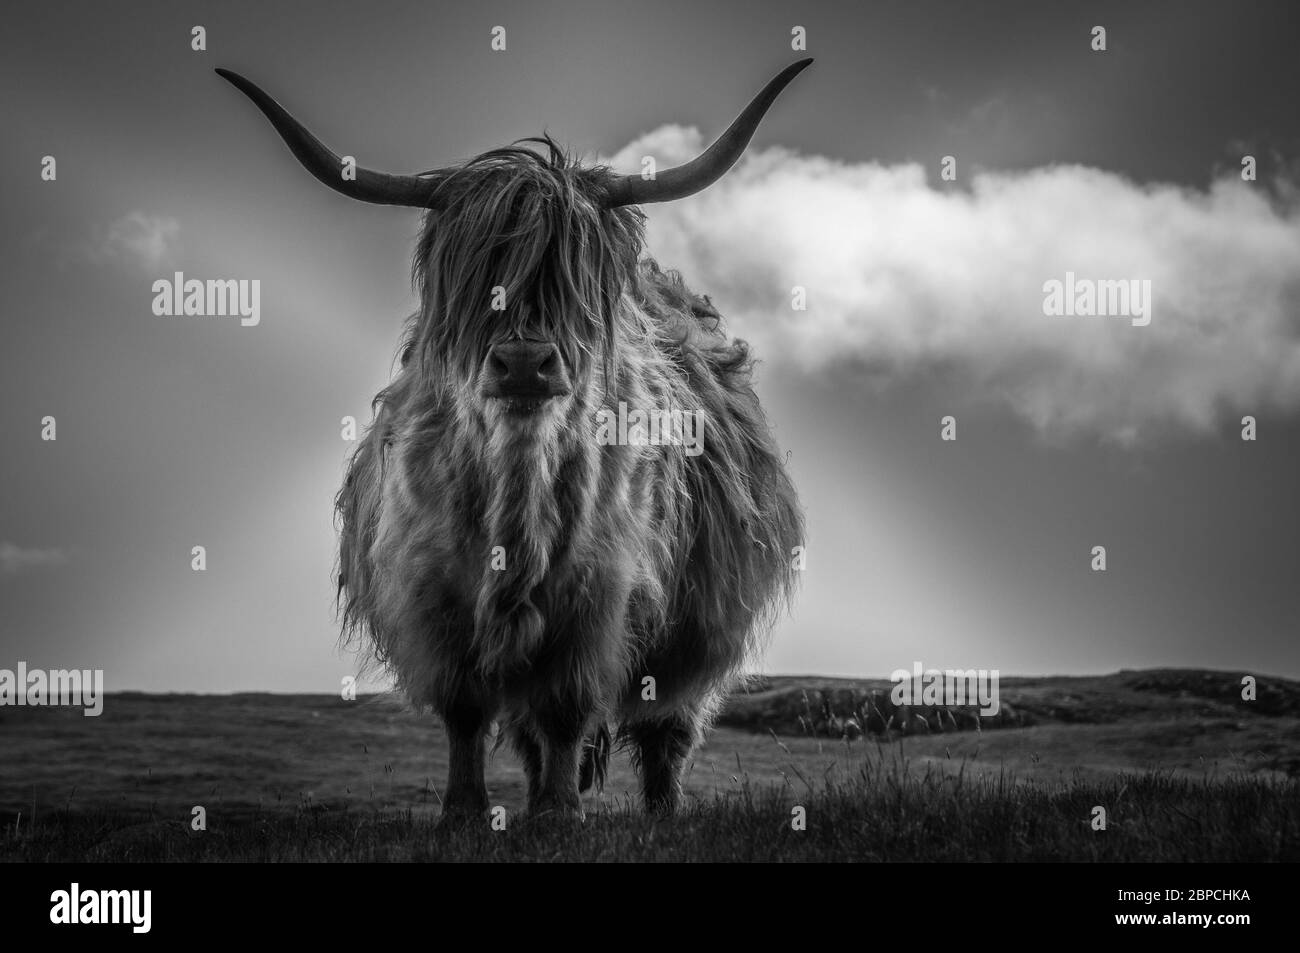 Black and white portrait of highlander cow with hair moved by the wind, Scotland Stock Photo